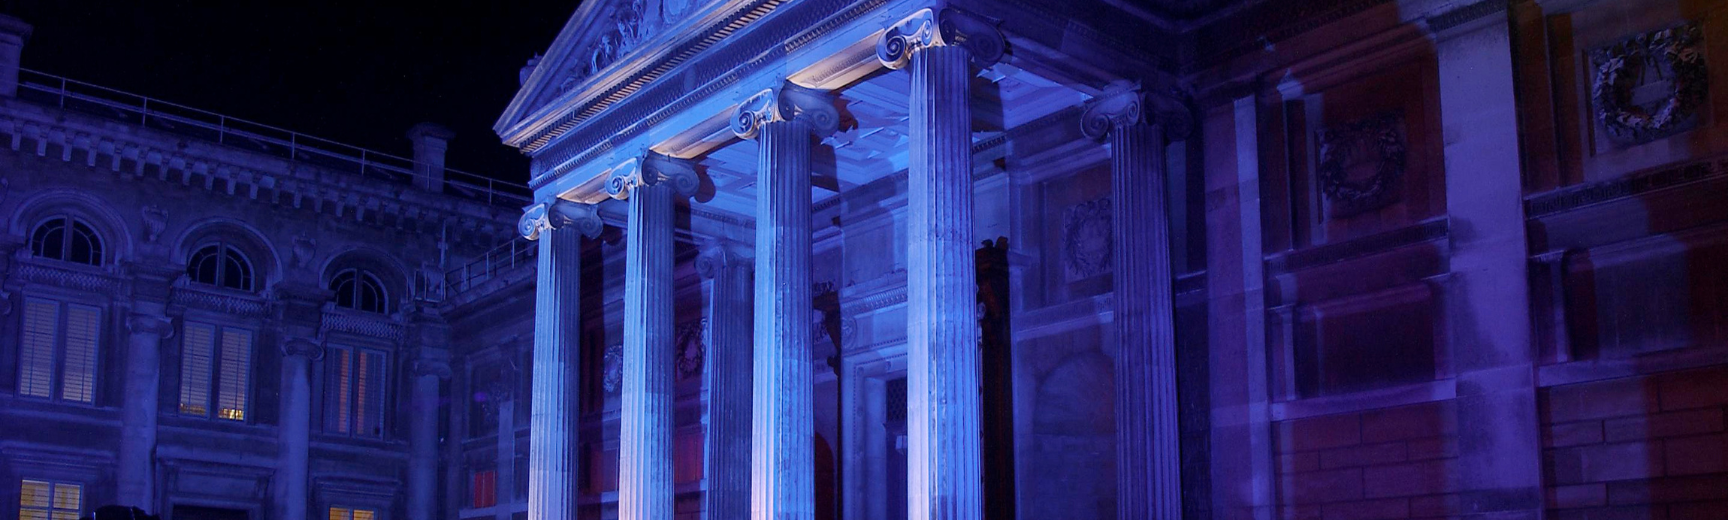 The Ashmolean Museum facade illuminated in pink and blue at night